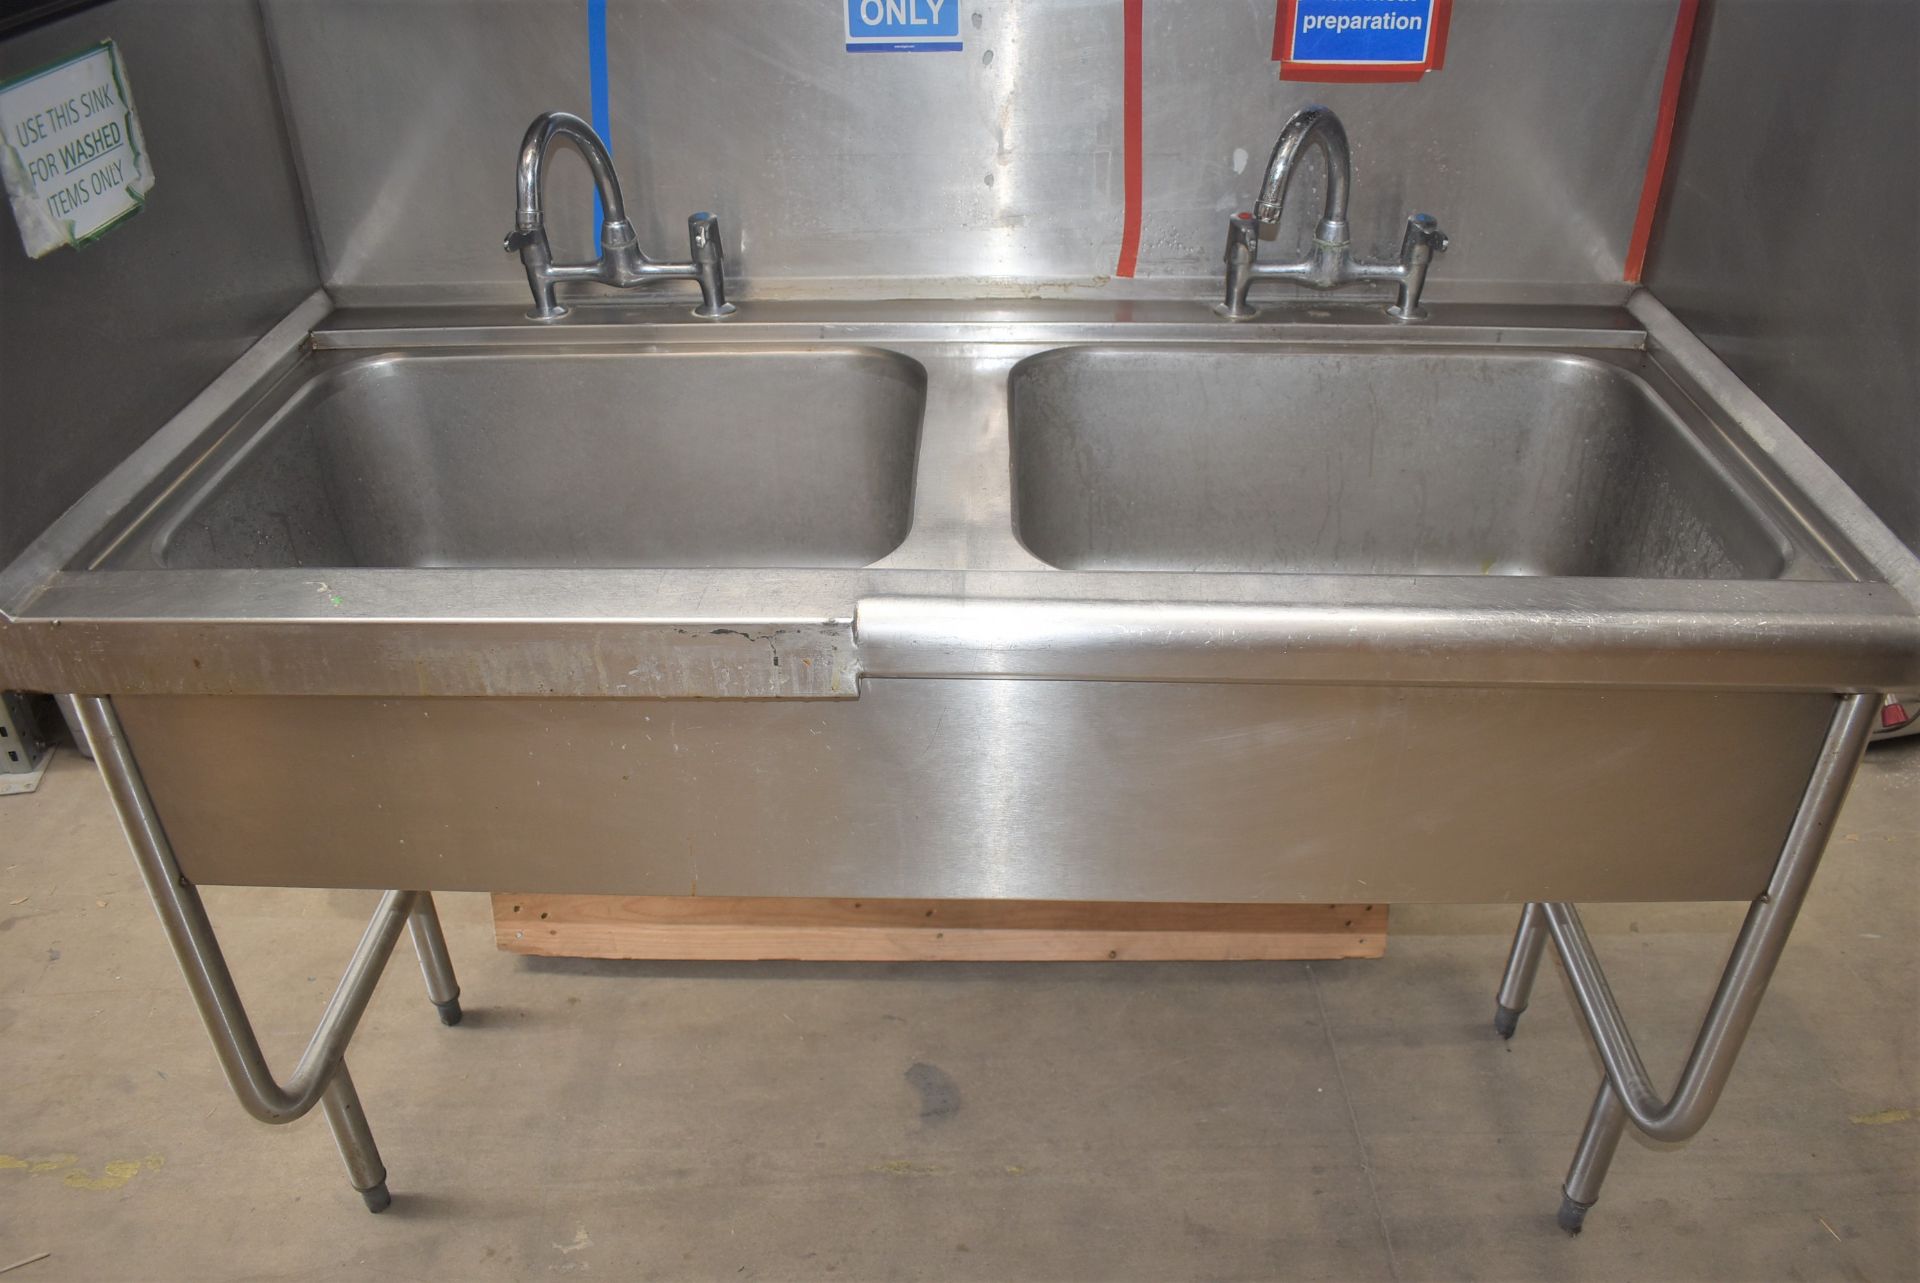 1 x Stainless Steel Twin Sink Wash Unit With Mixer Taps and Splash Back Surround - Width: 125 cms - Image 3 of 11